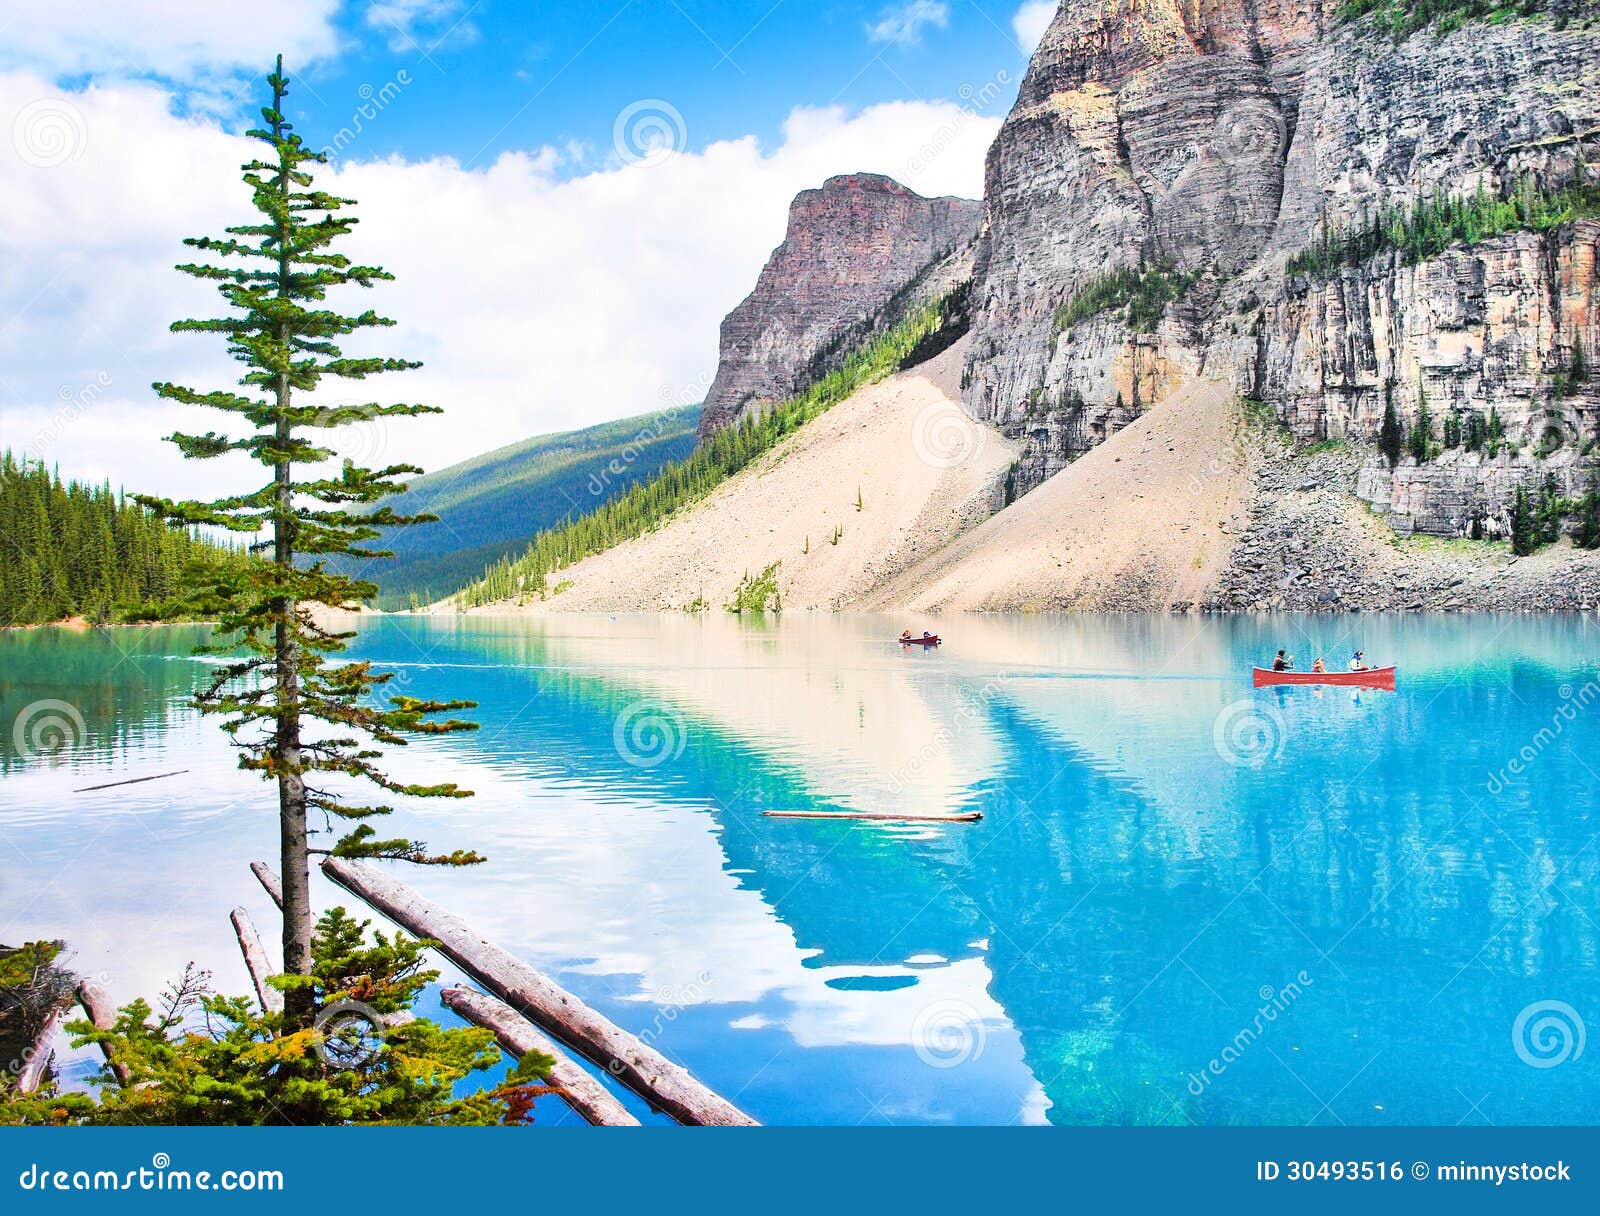 beautiful landscape with rocky mountains and mountain lake in alberta, canada